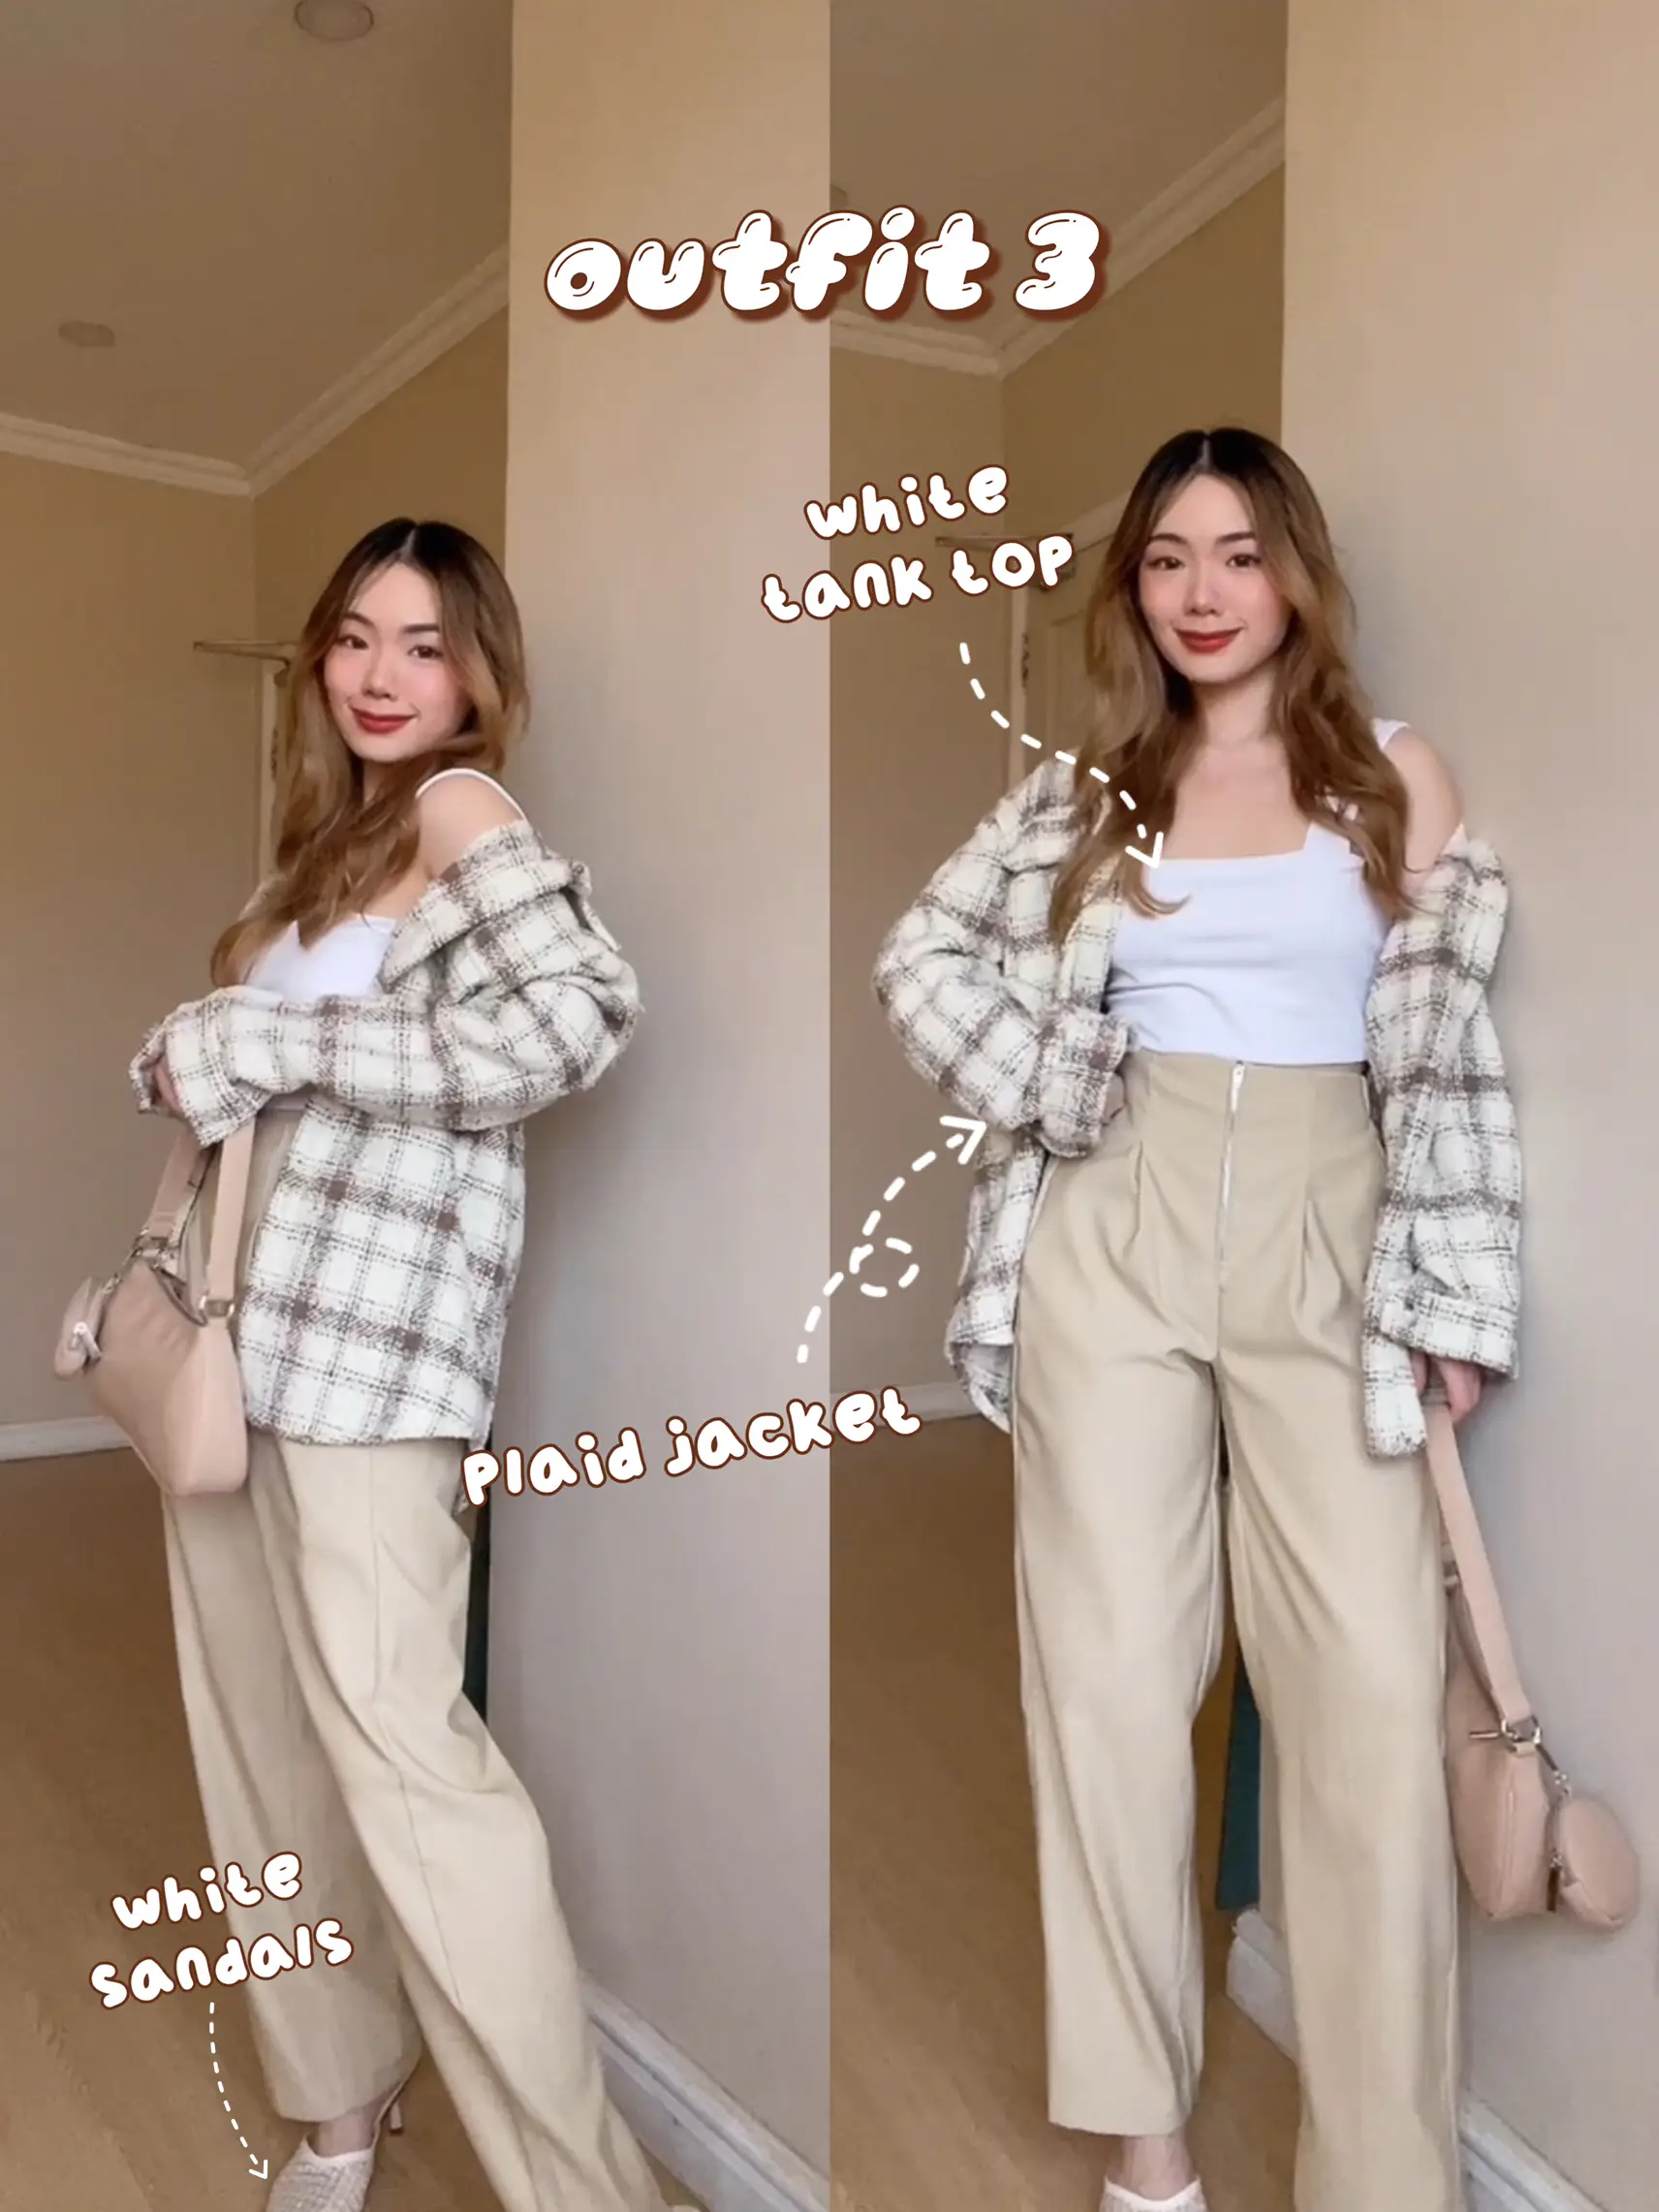 Easy ways to style trousers 🤎  Gallery posted by Colleen Matti